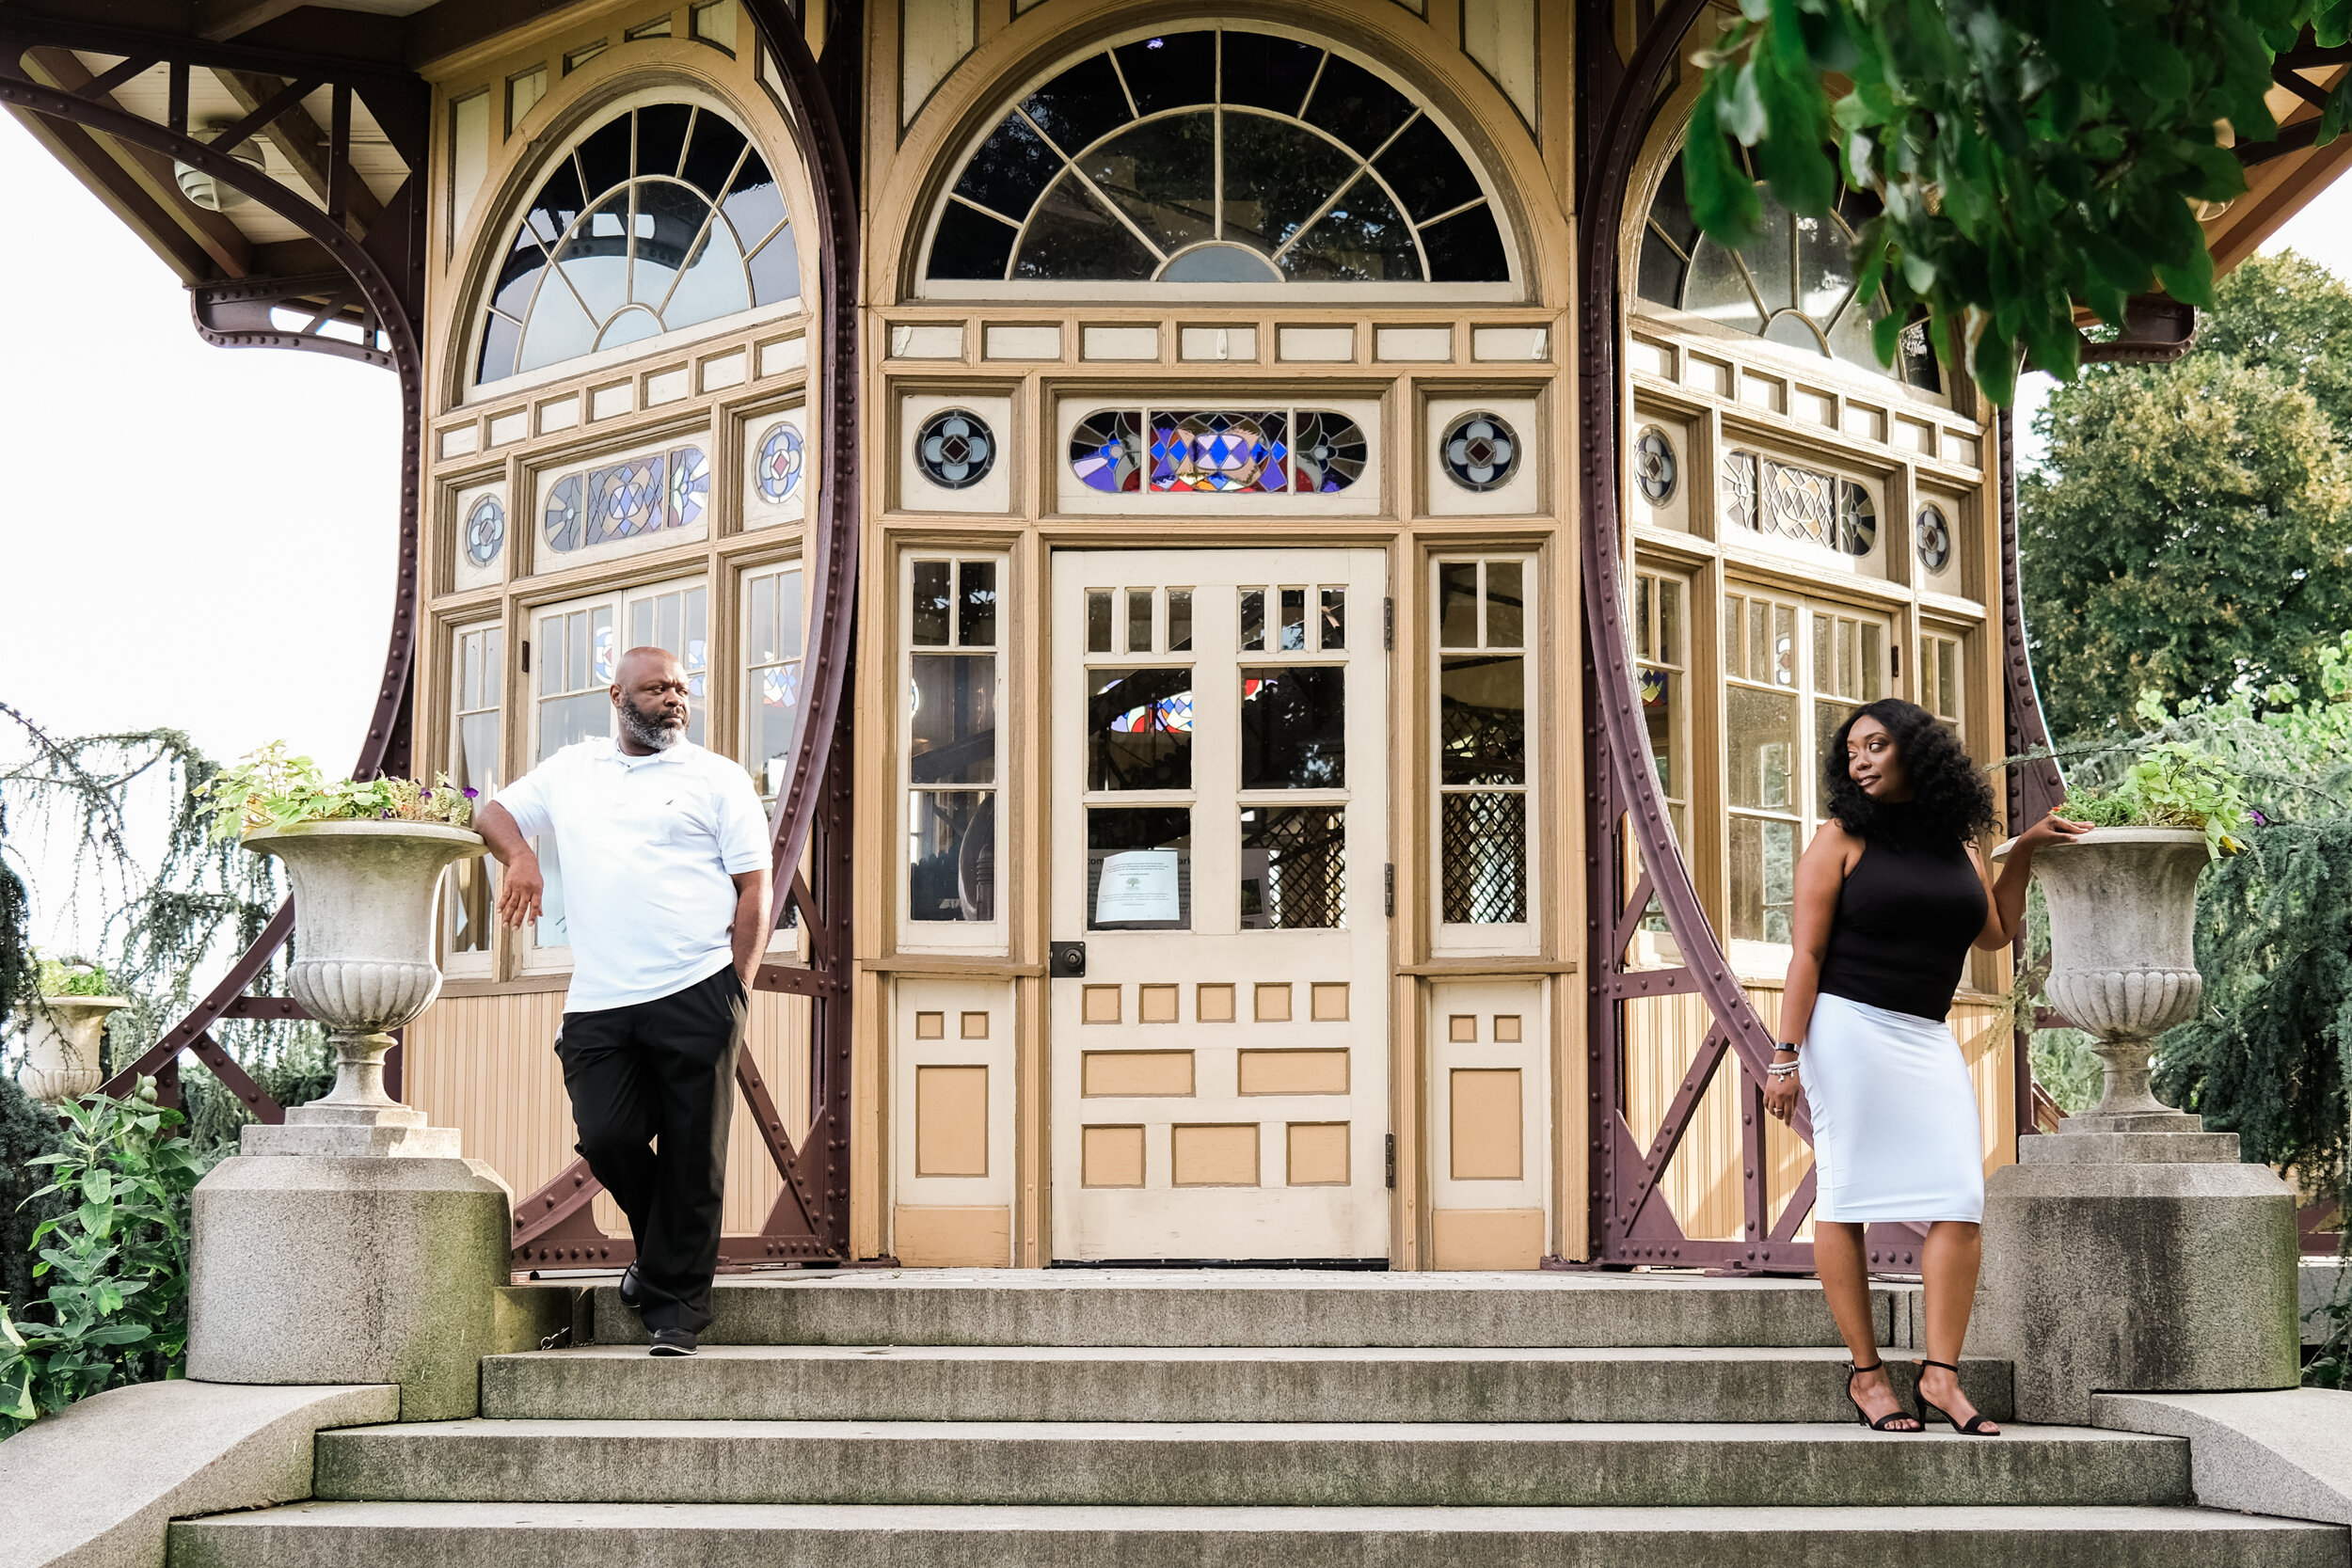 Patterson Park Engagement Session with Black Photographers Megapixels media in Baltimore Maryland (30 of 32).jpg